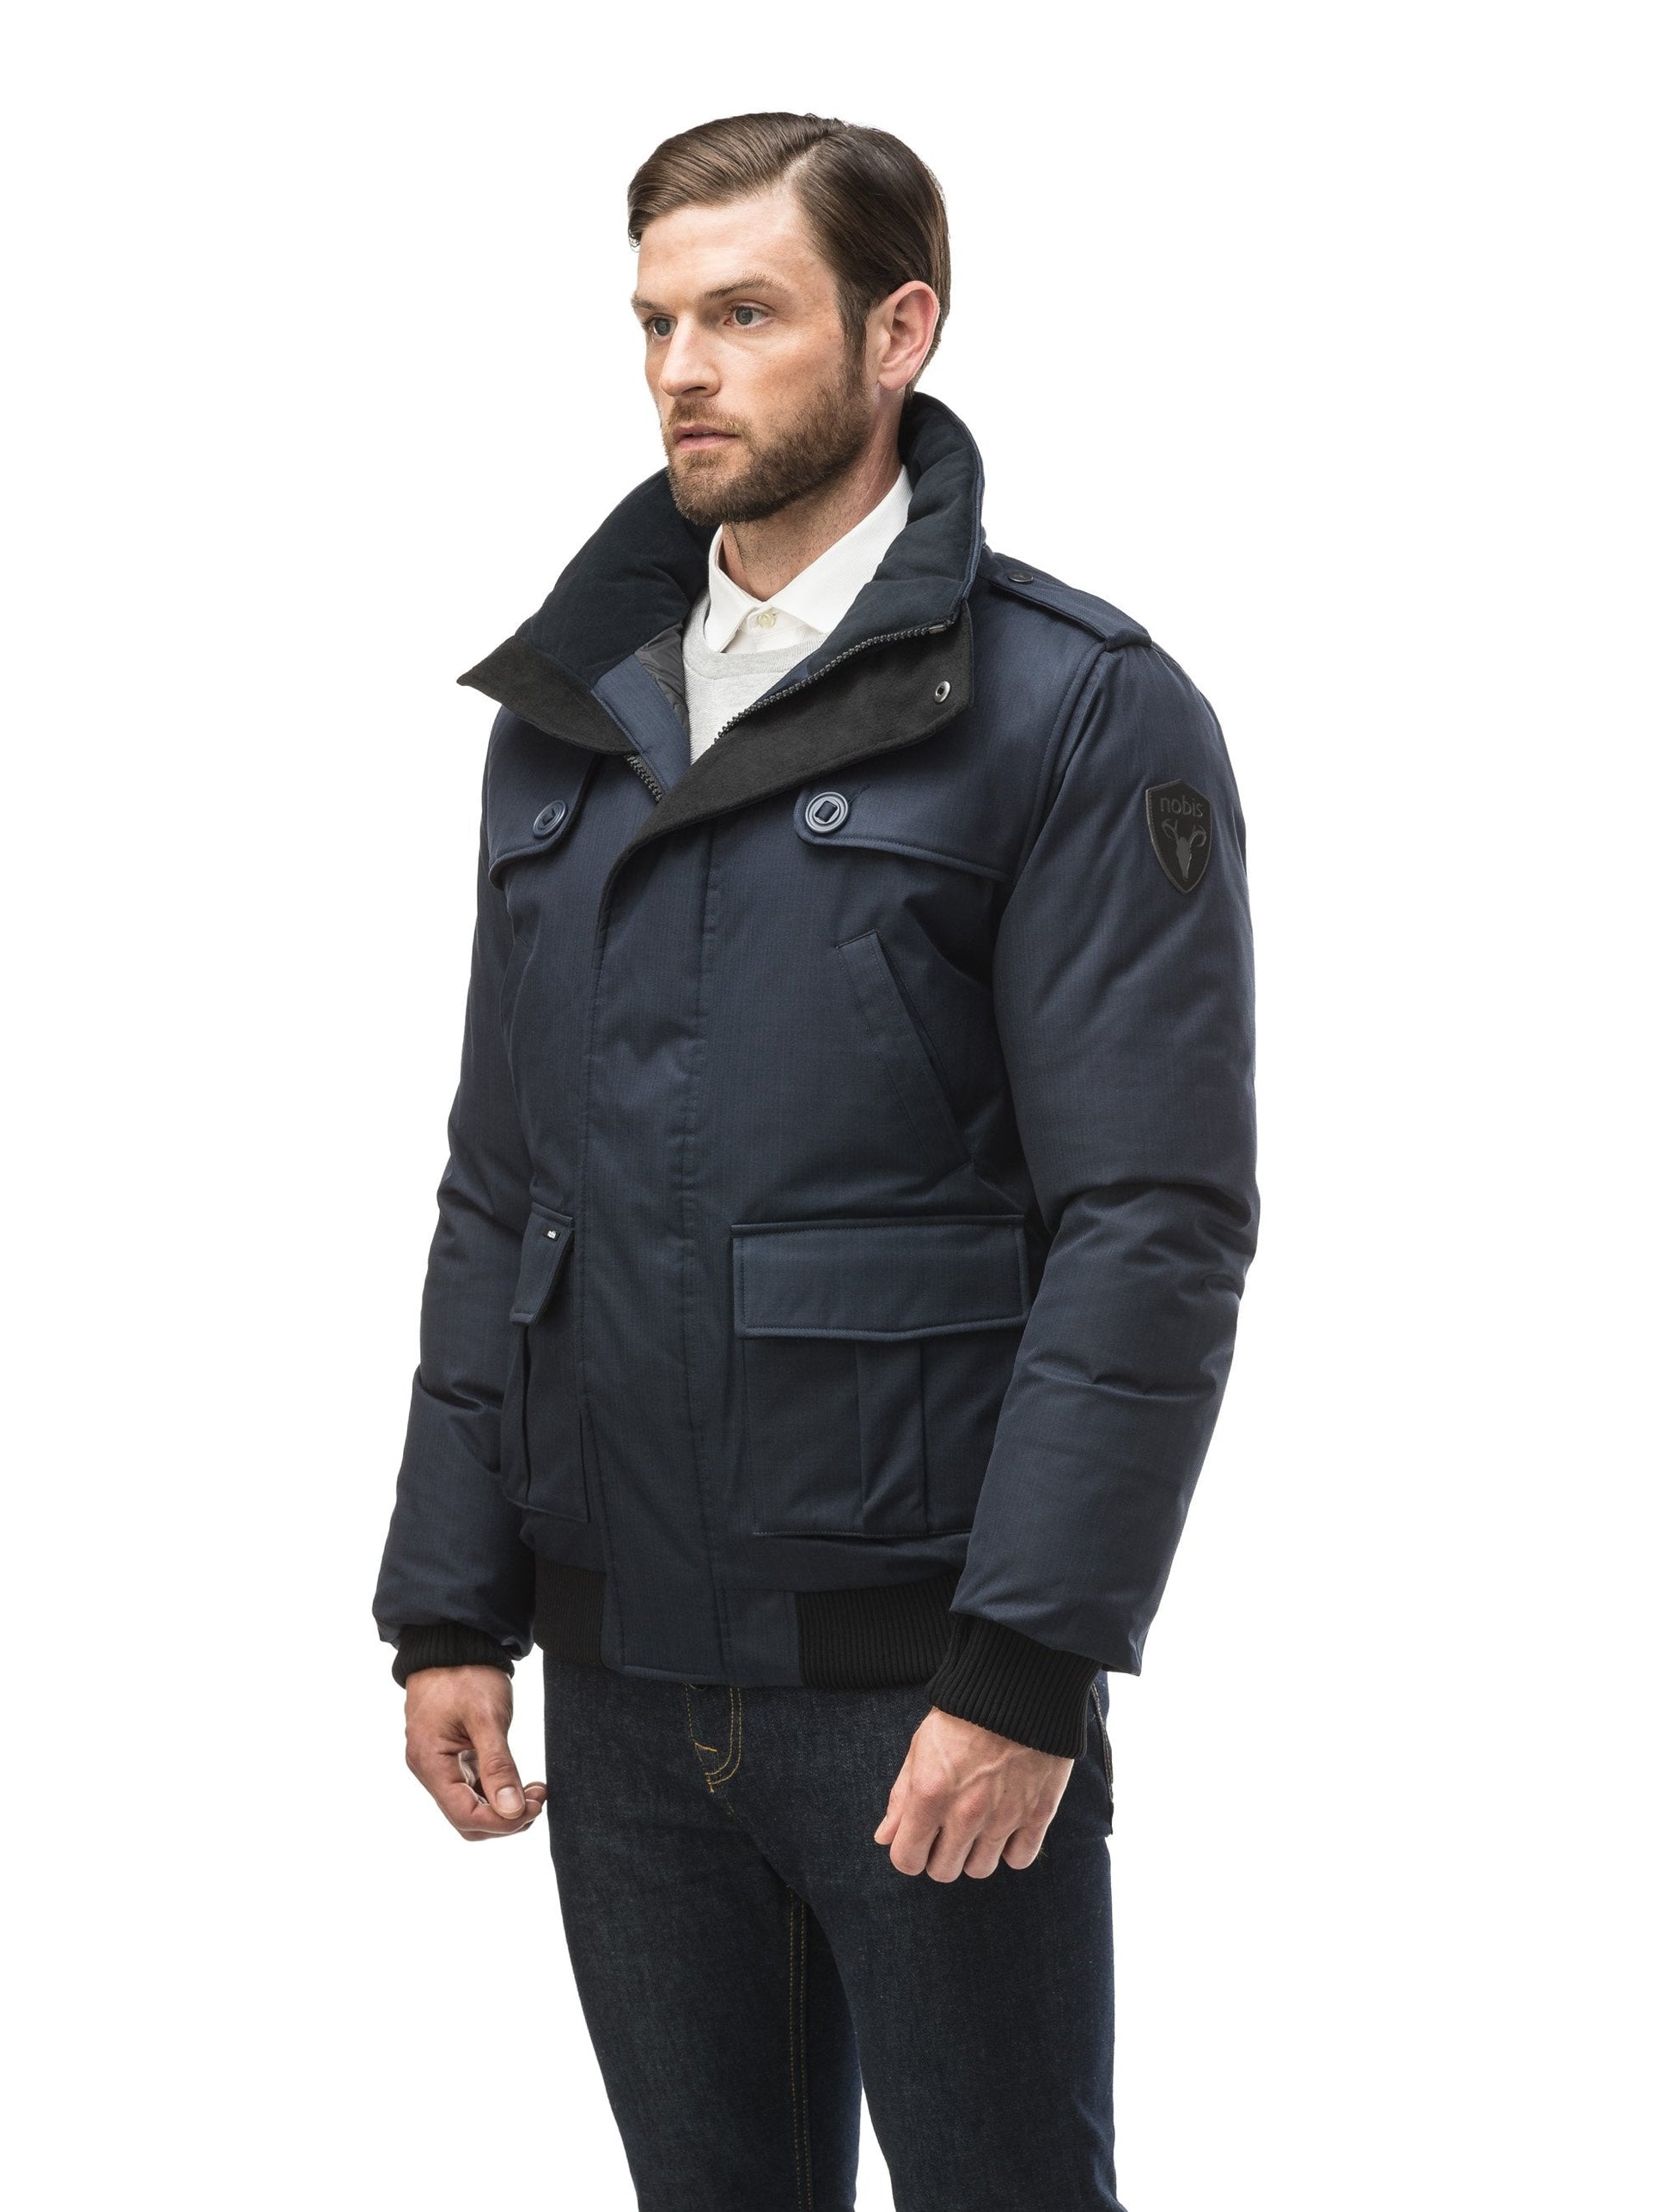 Men's down filled bomber that sits just above the hips with a completely removable hood that's windproof, waterproof, and breathable in CH Navy